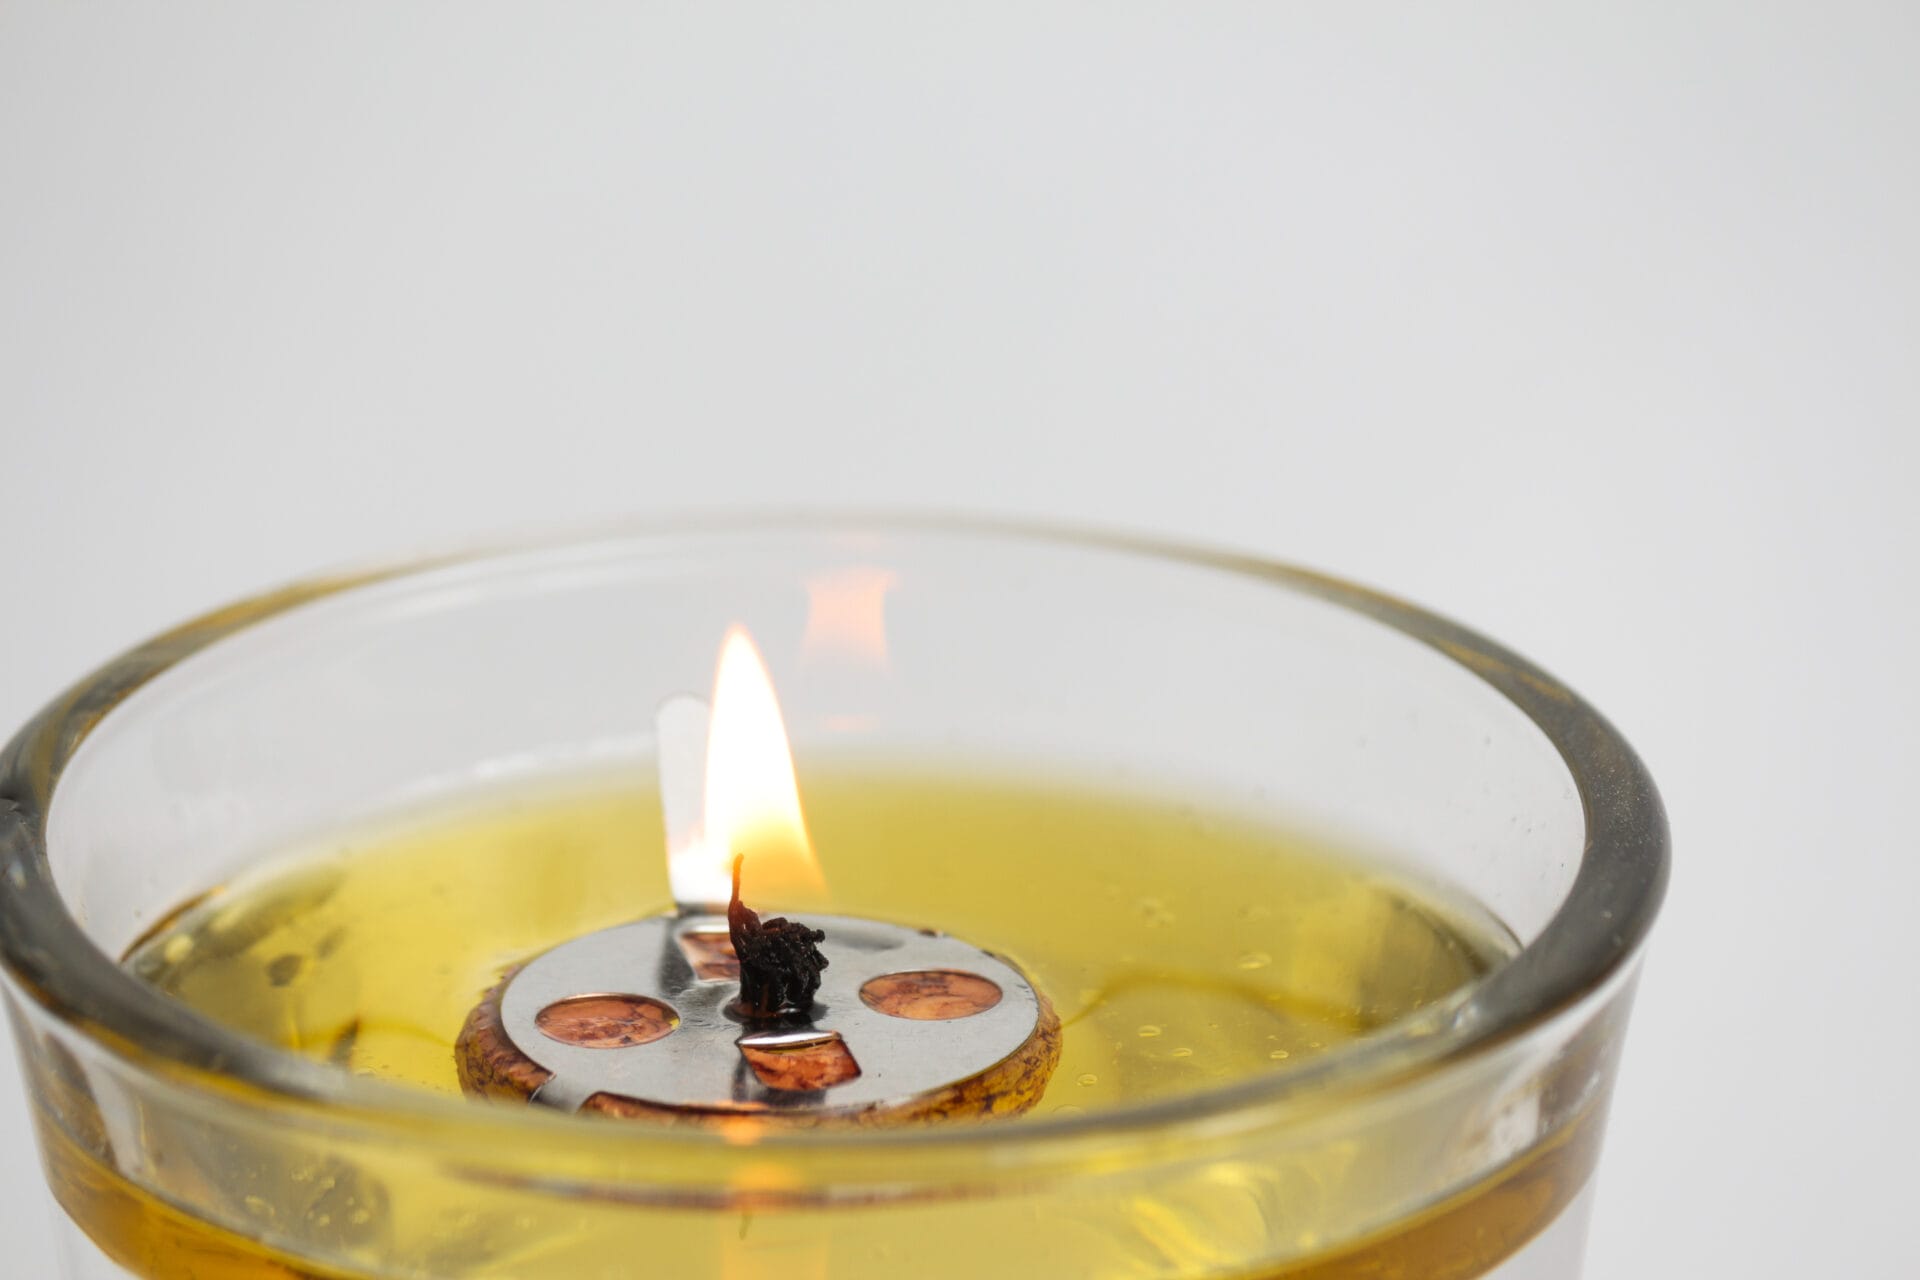 What does the candle symbolize in our lives?